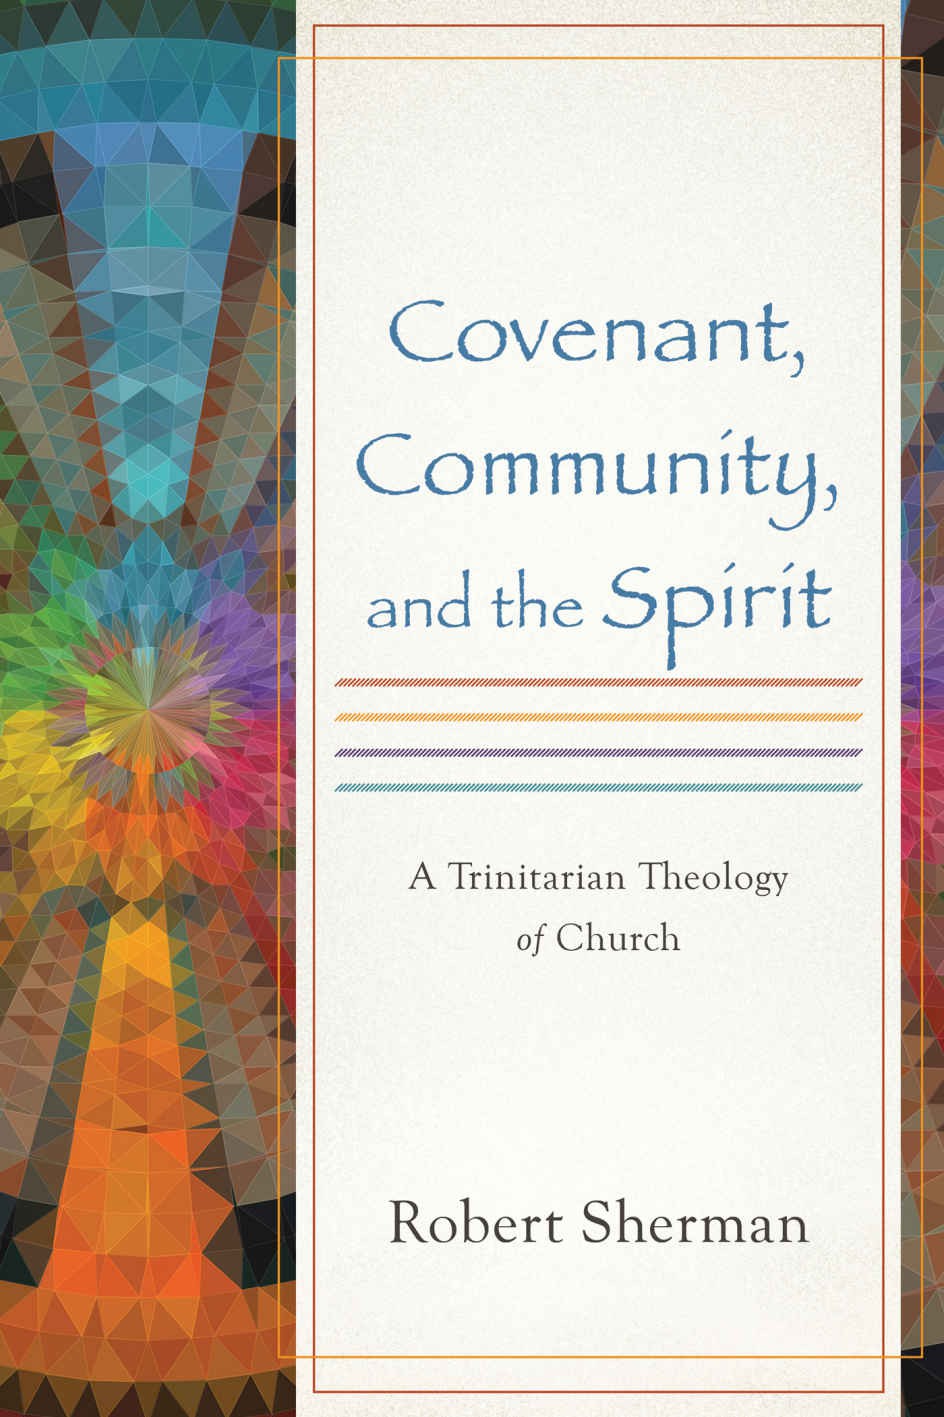 Covenant, Community, and the Spirit: A Trinitarian Theology of Church